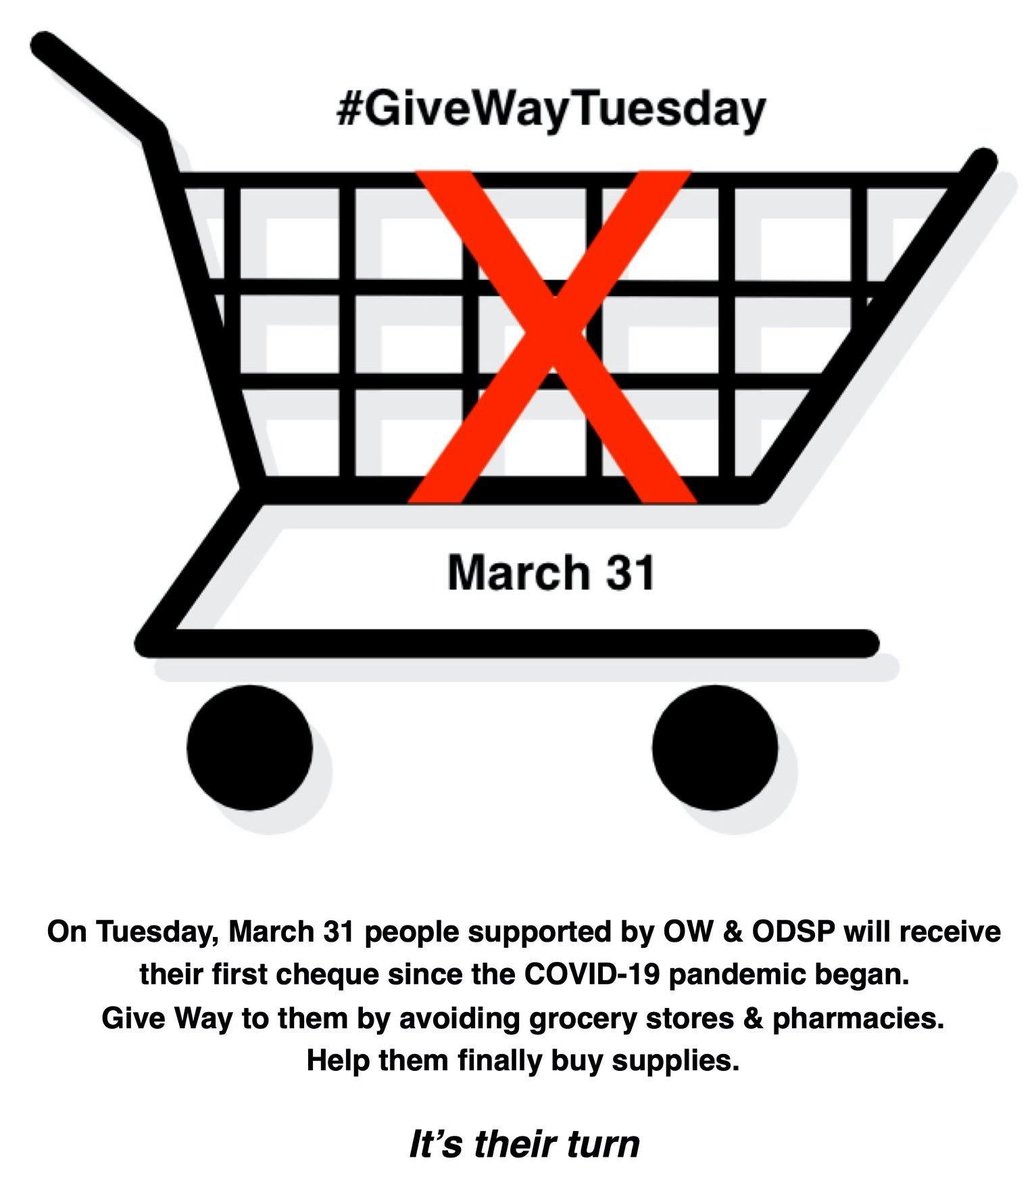 Tomorrow, ODSP and OW recipients will get their first cheque since the pandemic started. Please give way and let them take their turn at the grocery stores and pharmacies. #givewaytuesday